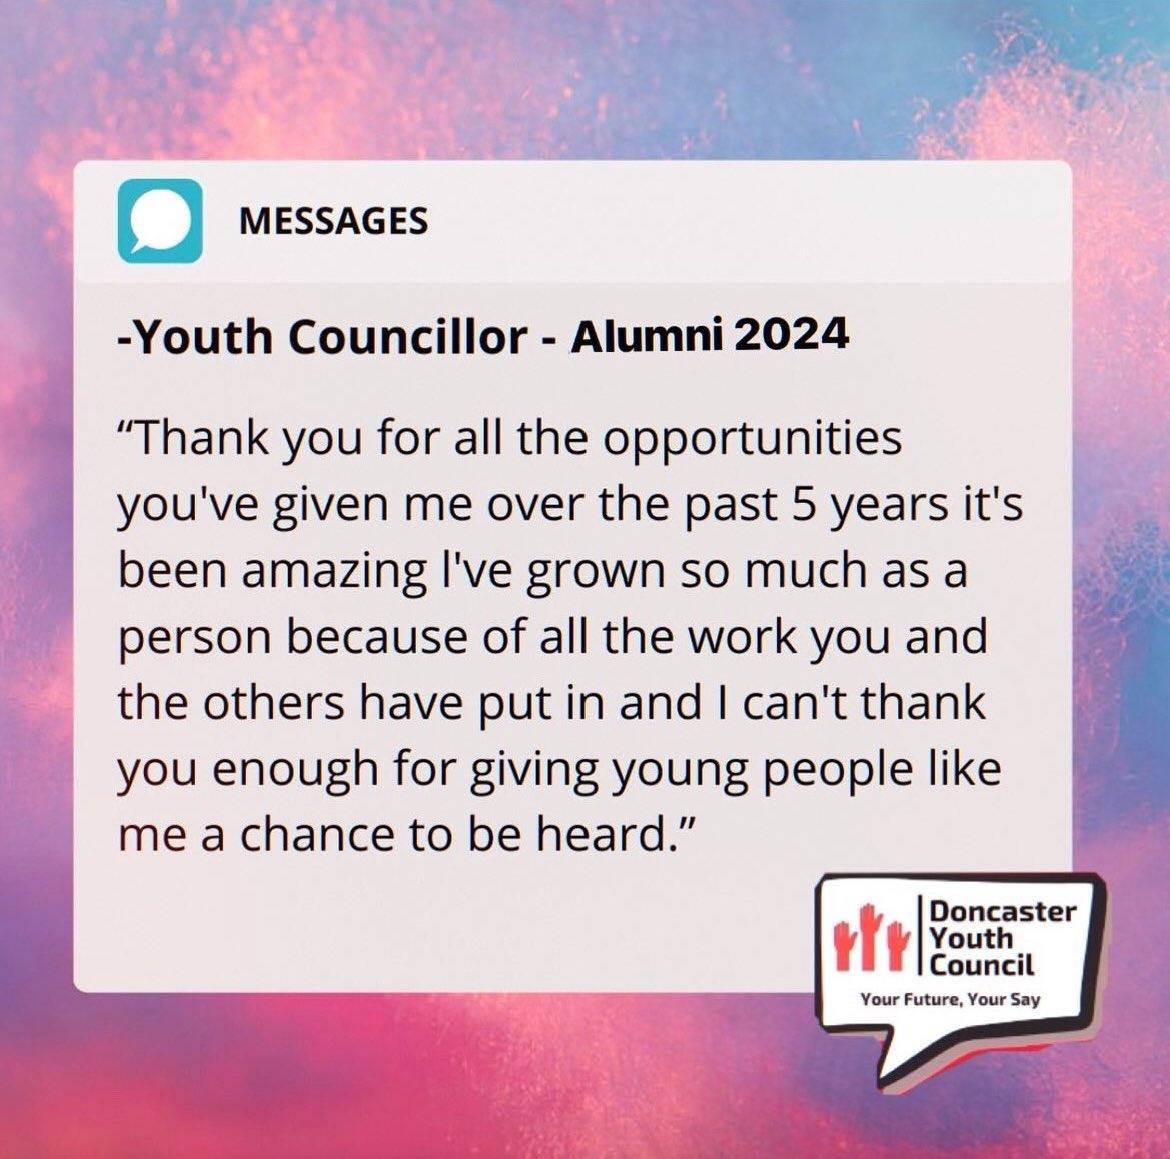 It’s moments like these which remind us why we do what we do🥹 To join the Youth Council you don’t have to be massively confident, live and breathe politics… you just have to CARE and WANT TO MAKE A DIFFERENCE!🙌 @lanimae14 @Rianaguk @DoncasterDamian @LeeGolzeFF @hornsbylj